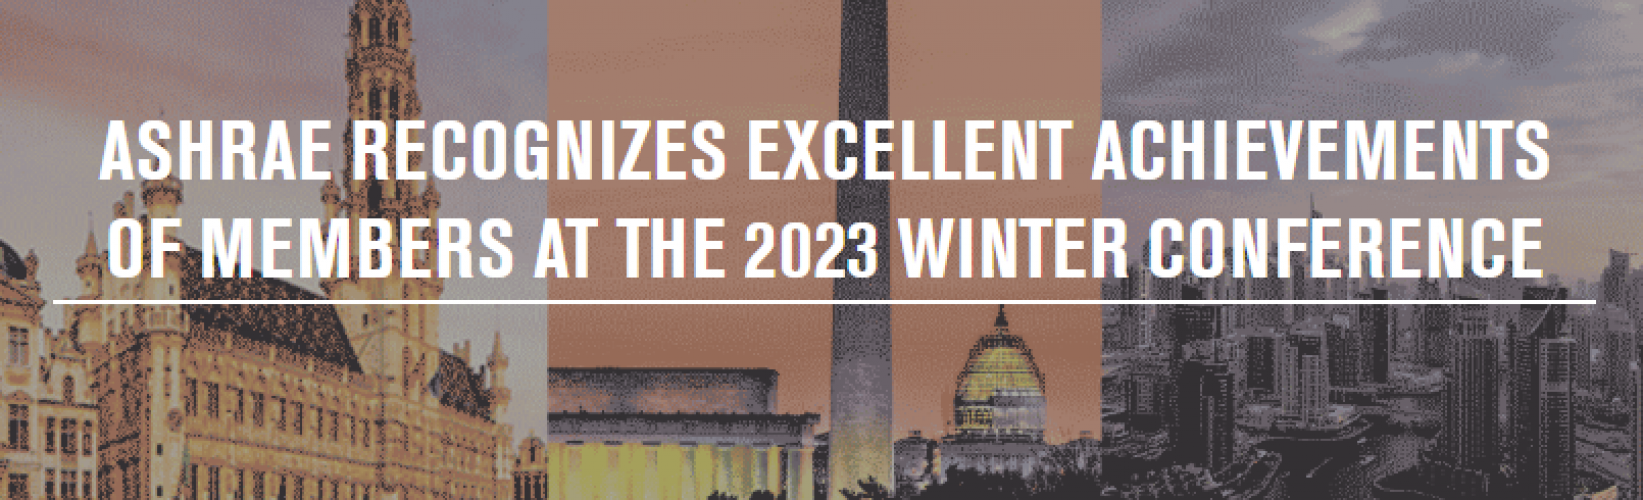 ashrae-recognizes-excellent-achievements-of-members-at-the-2023-winter-conference